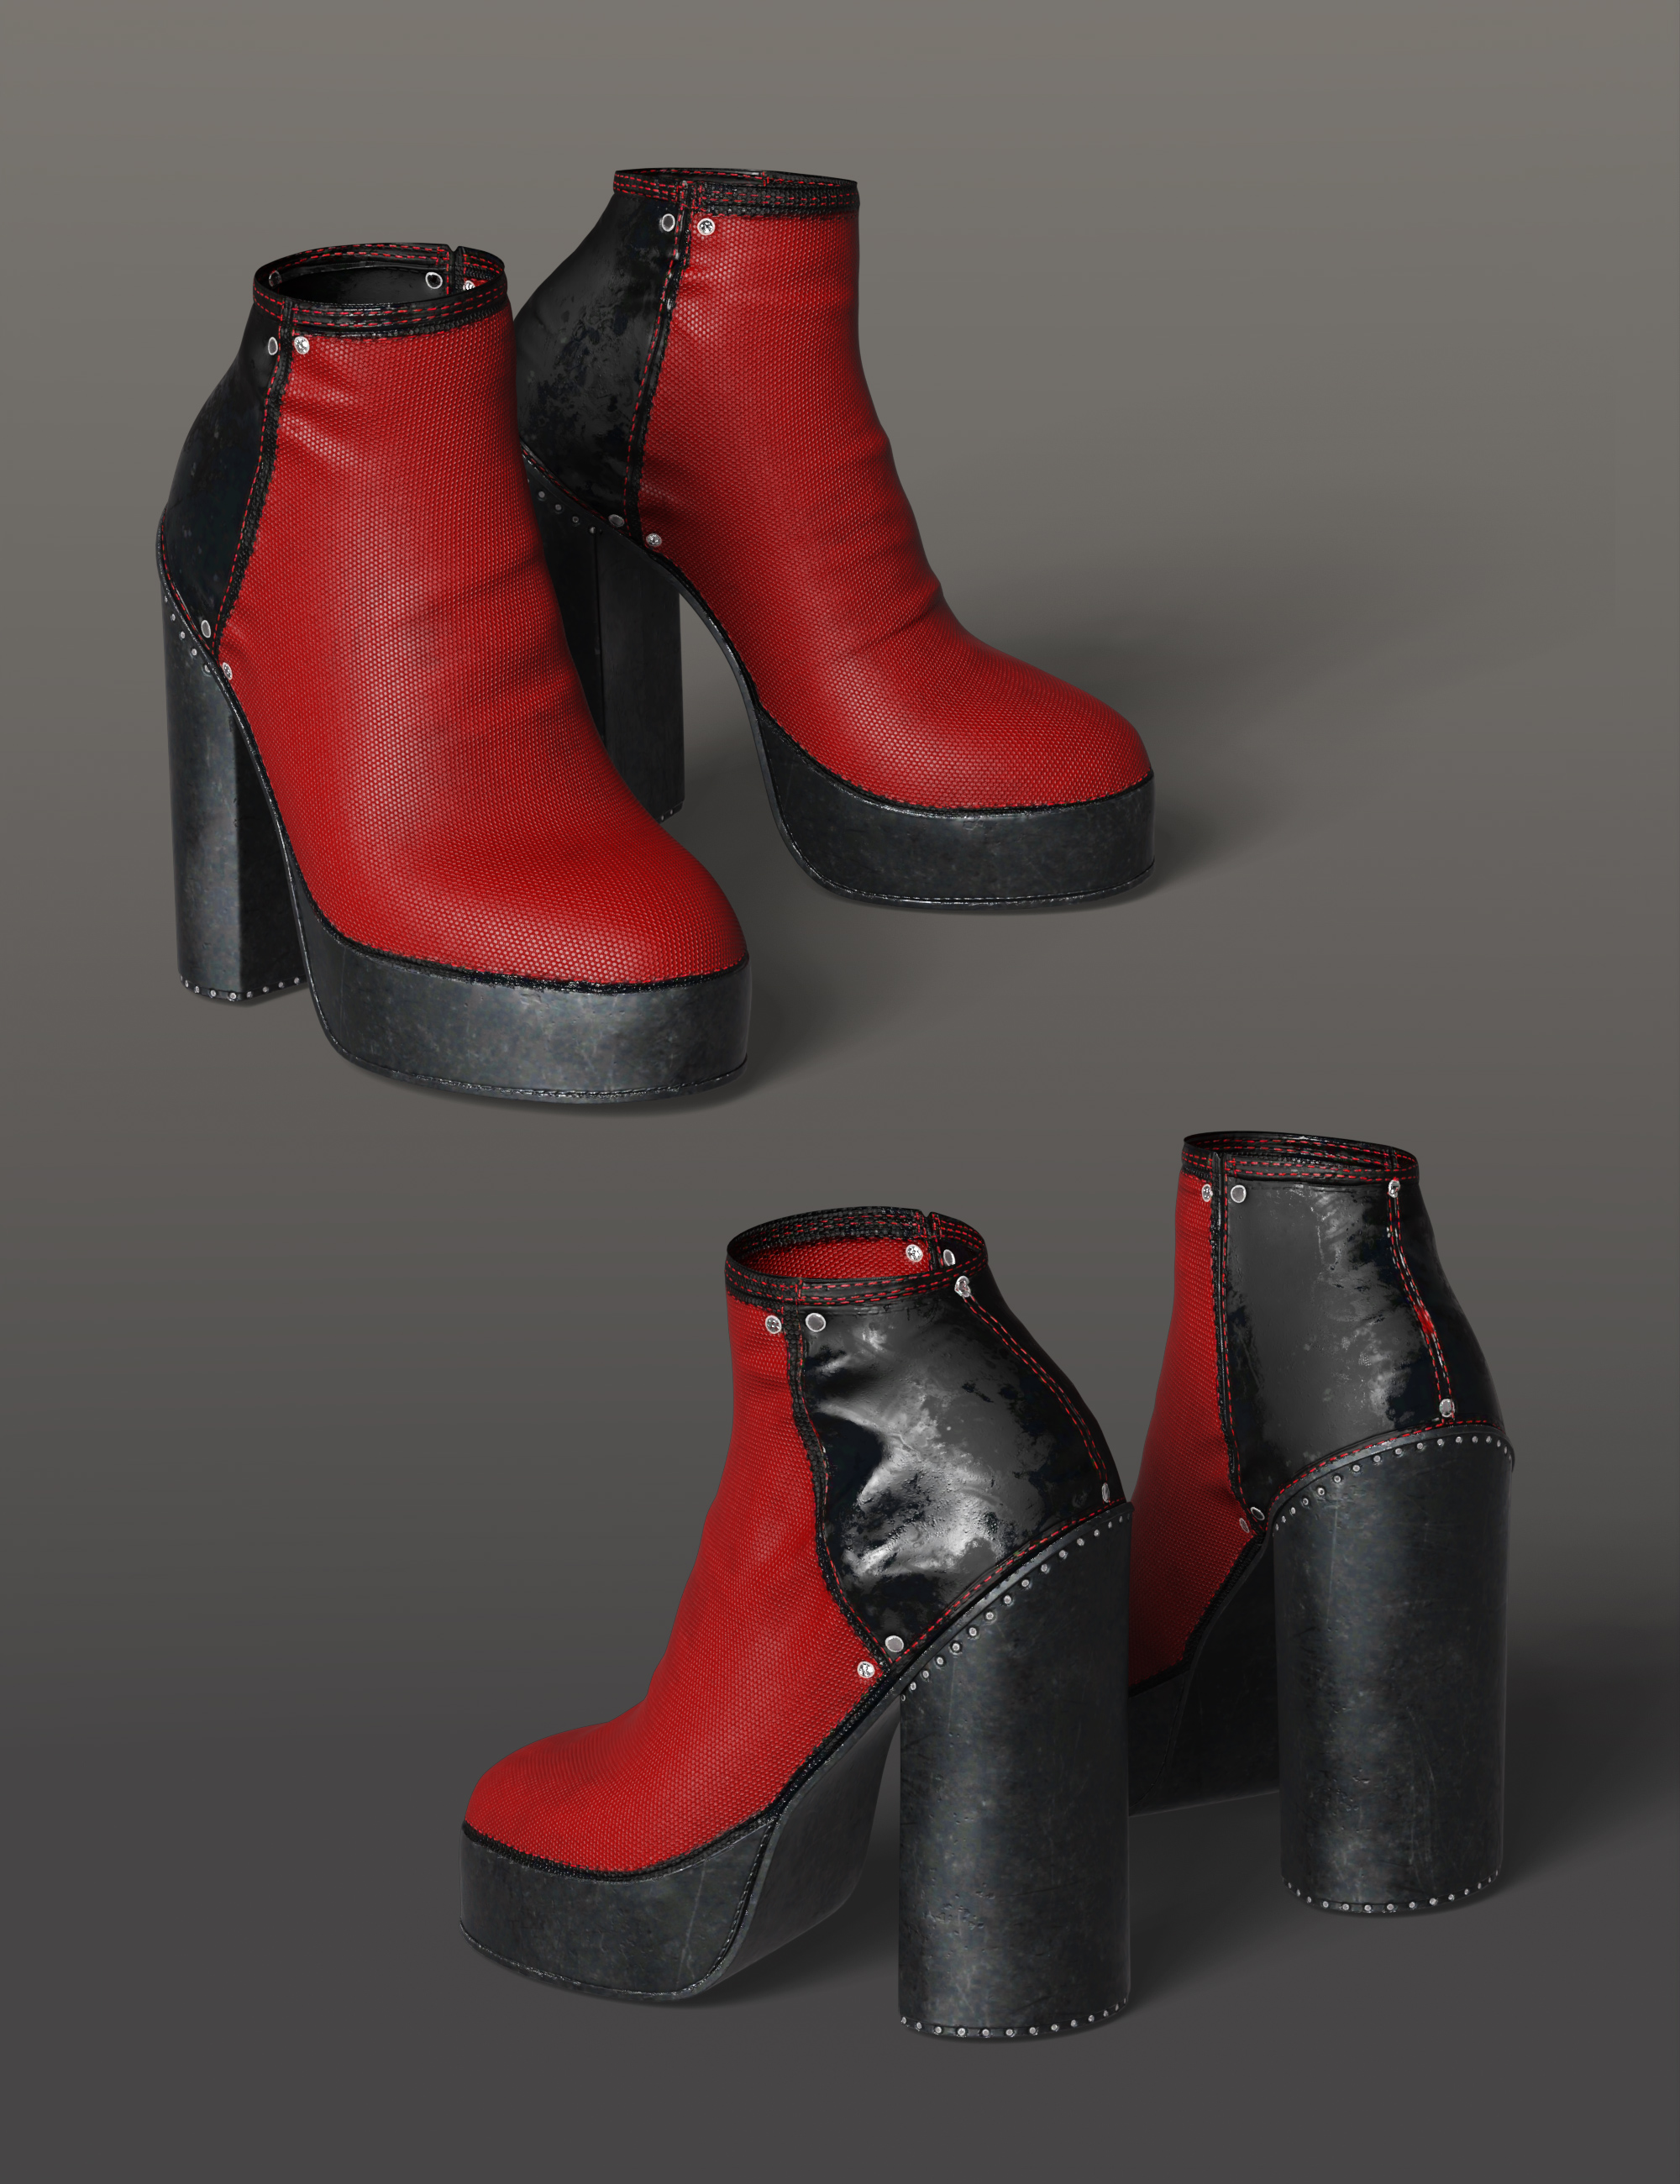 Shadow Realm Boots for Genesis 8 and 8.1 Females by: Barbara BrundonUmblefugly, 3D Models by Daz 3D